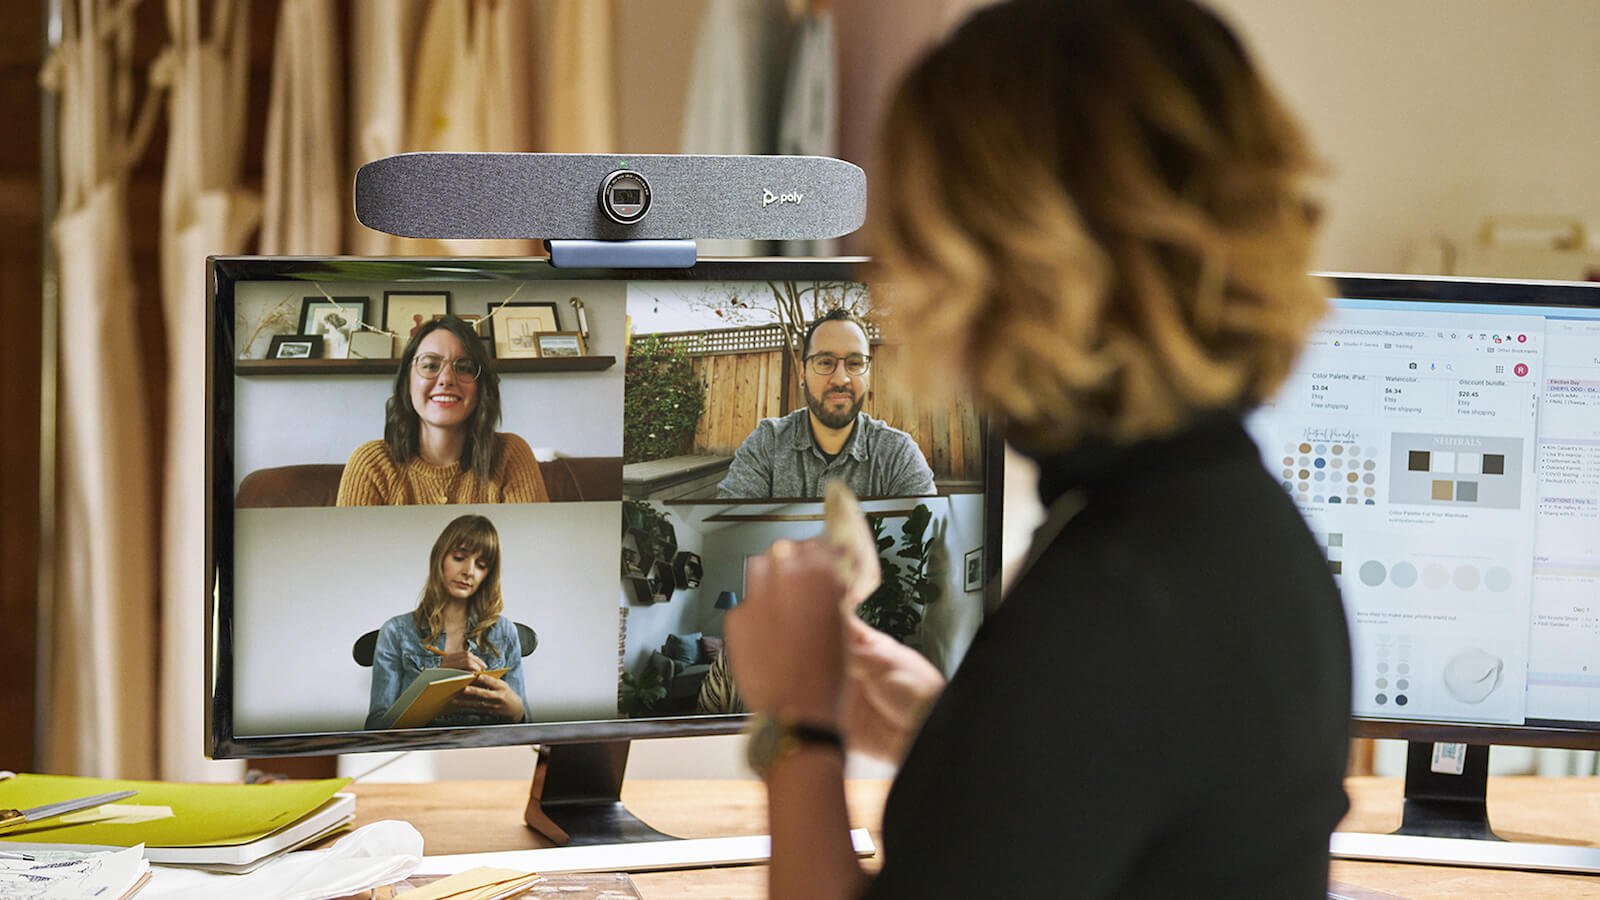 Poly Studio P15 videoconferencing bar features automatic camera framing